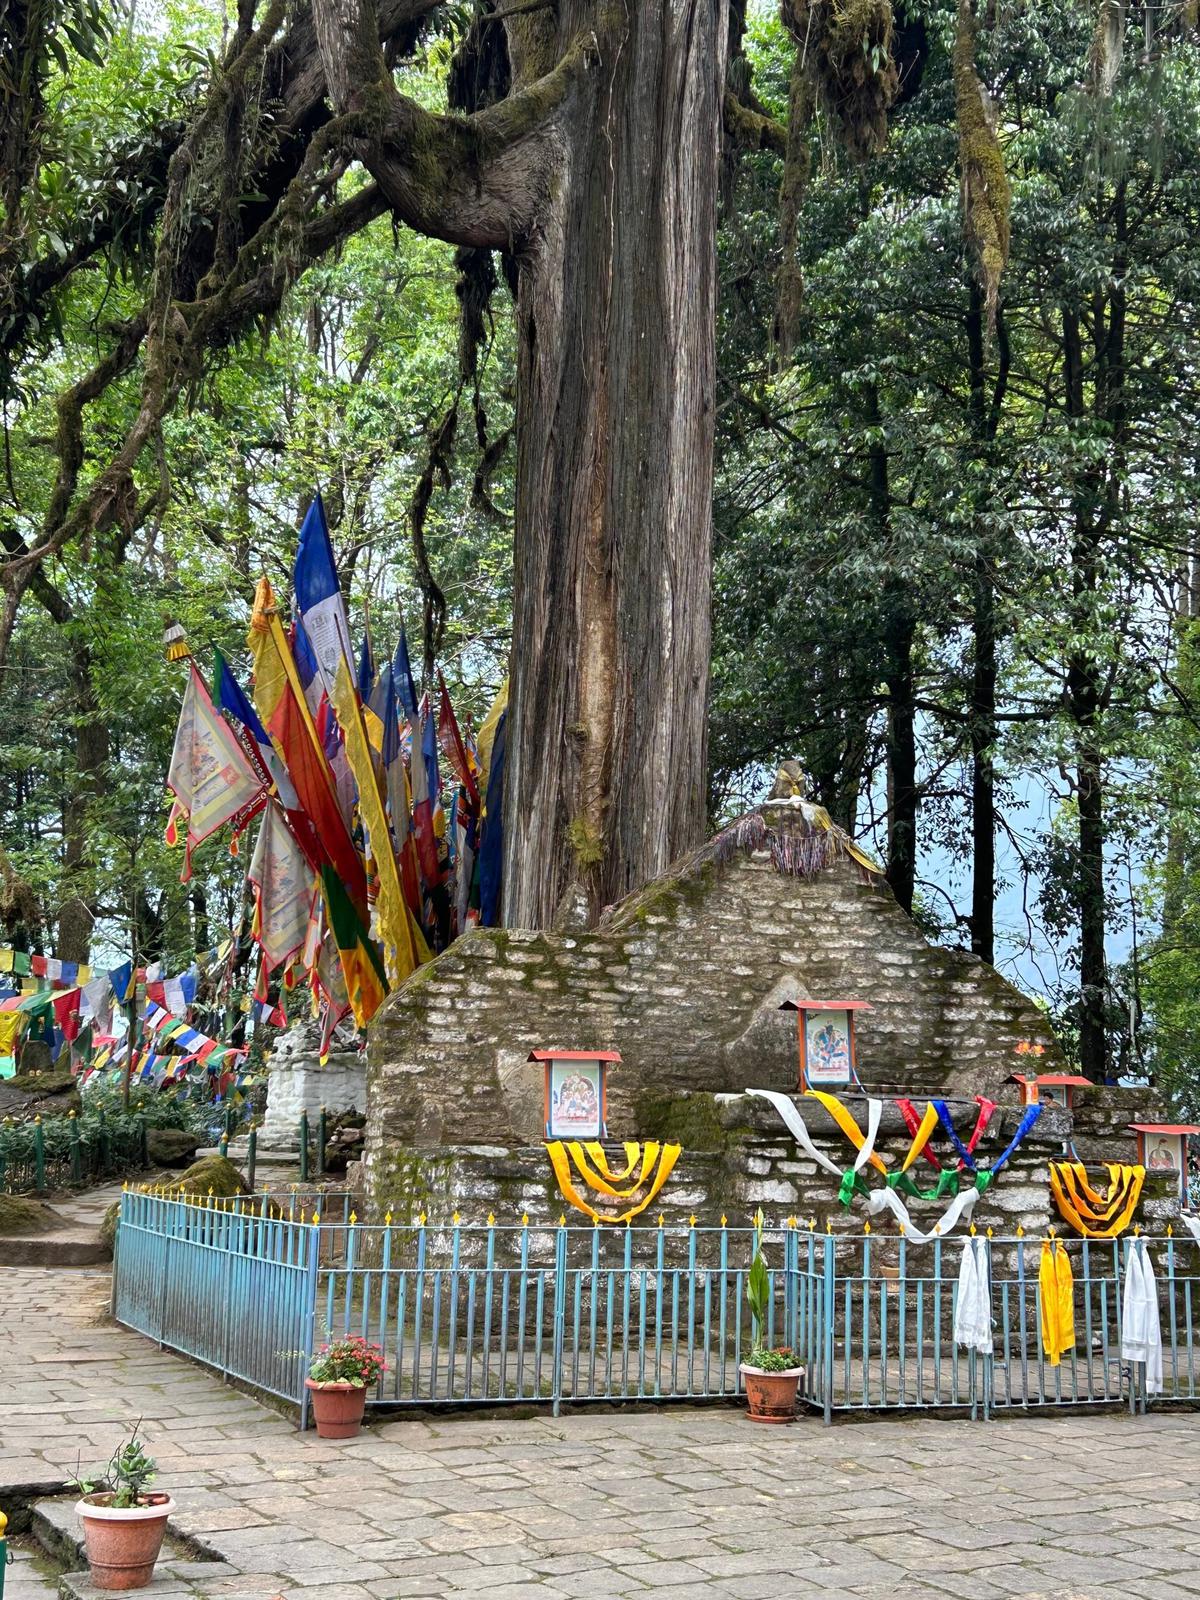 The coronation site - where Sikkim’s first king was crowned in 1642